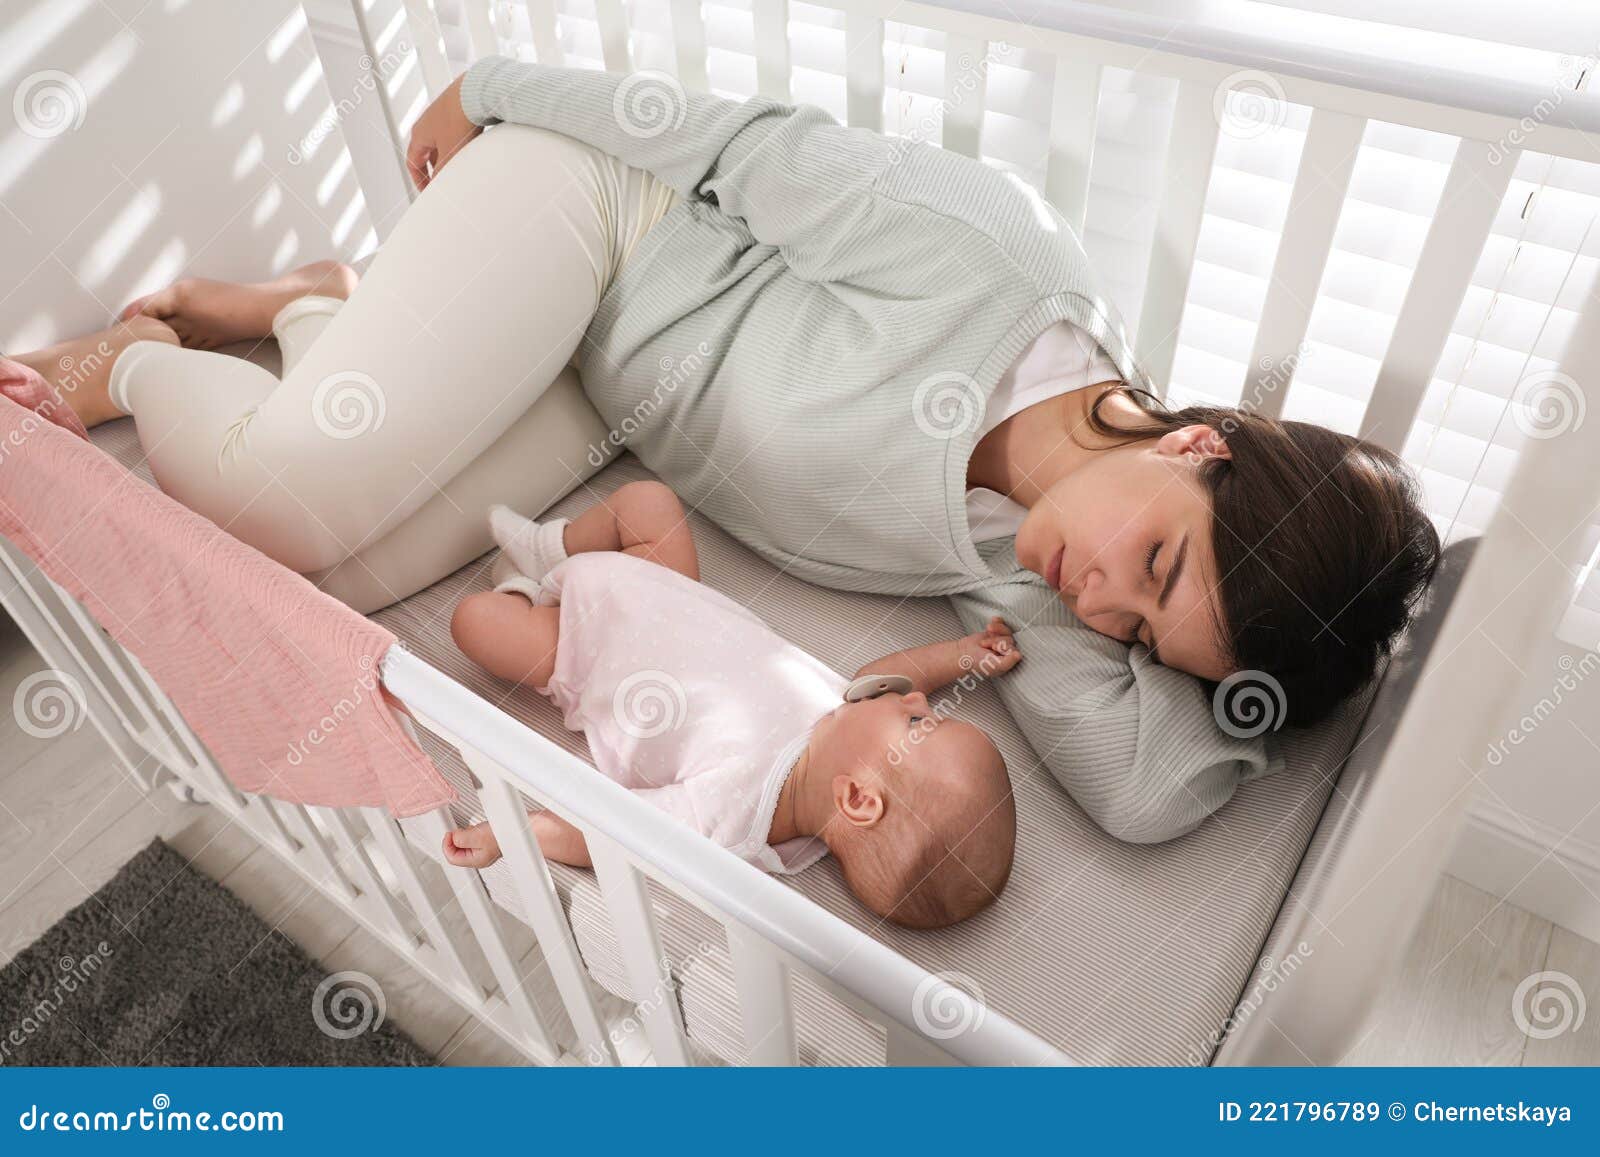 Mother Sleeping In Crib With Baby Online